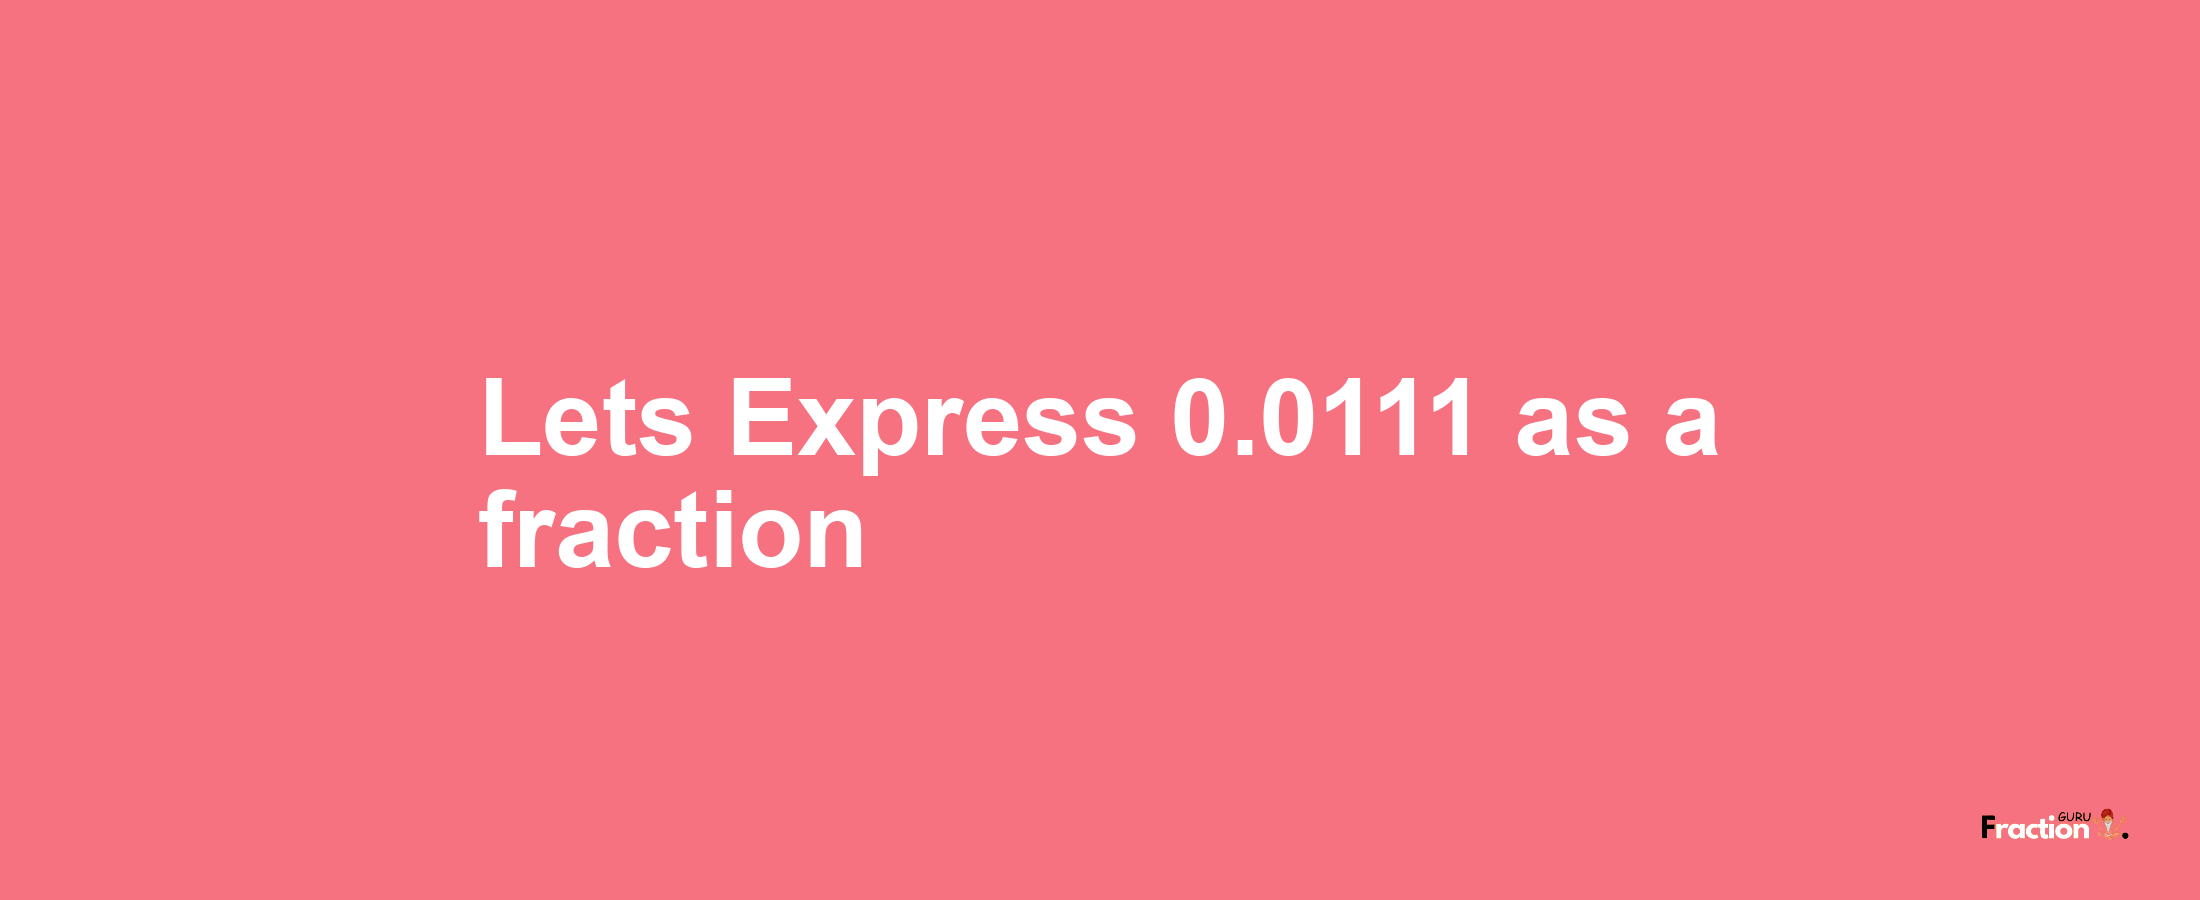 Lets Express 0.0111 as afraction